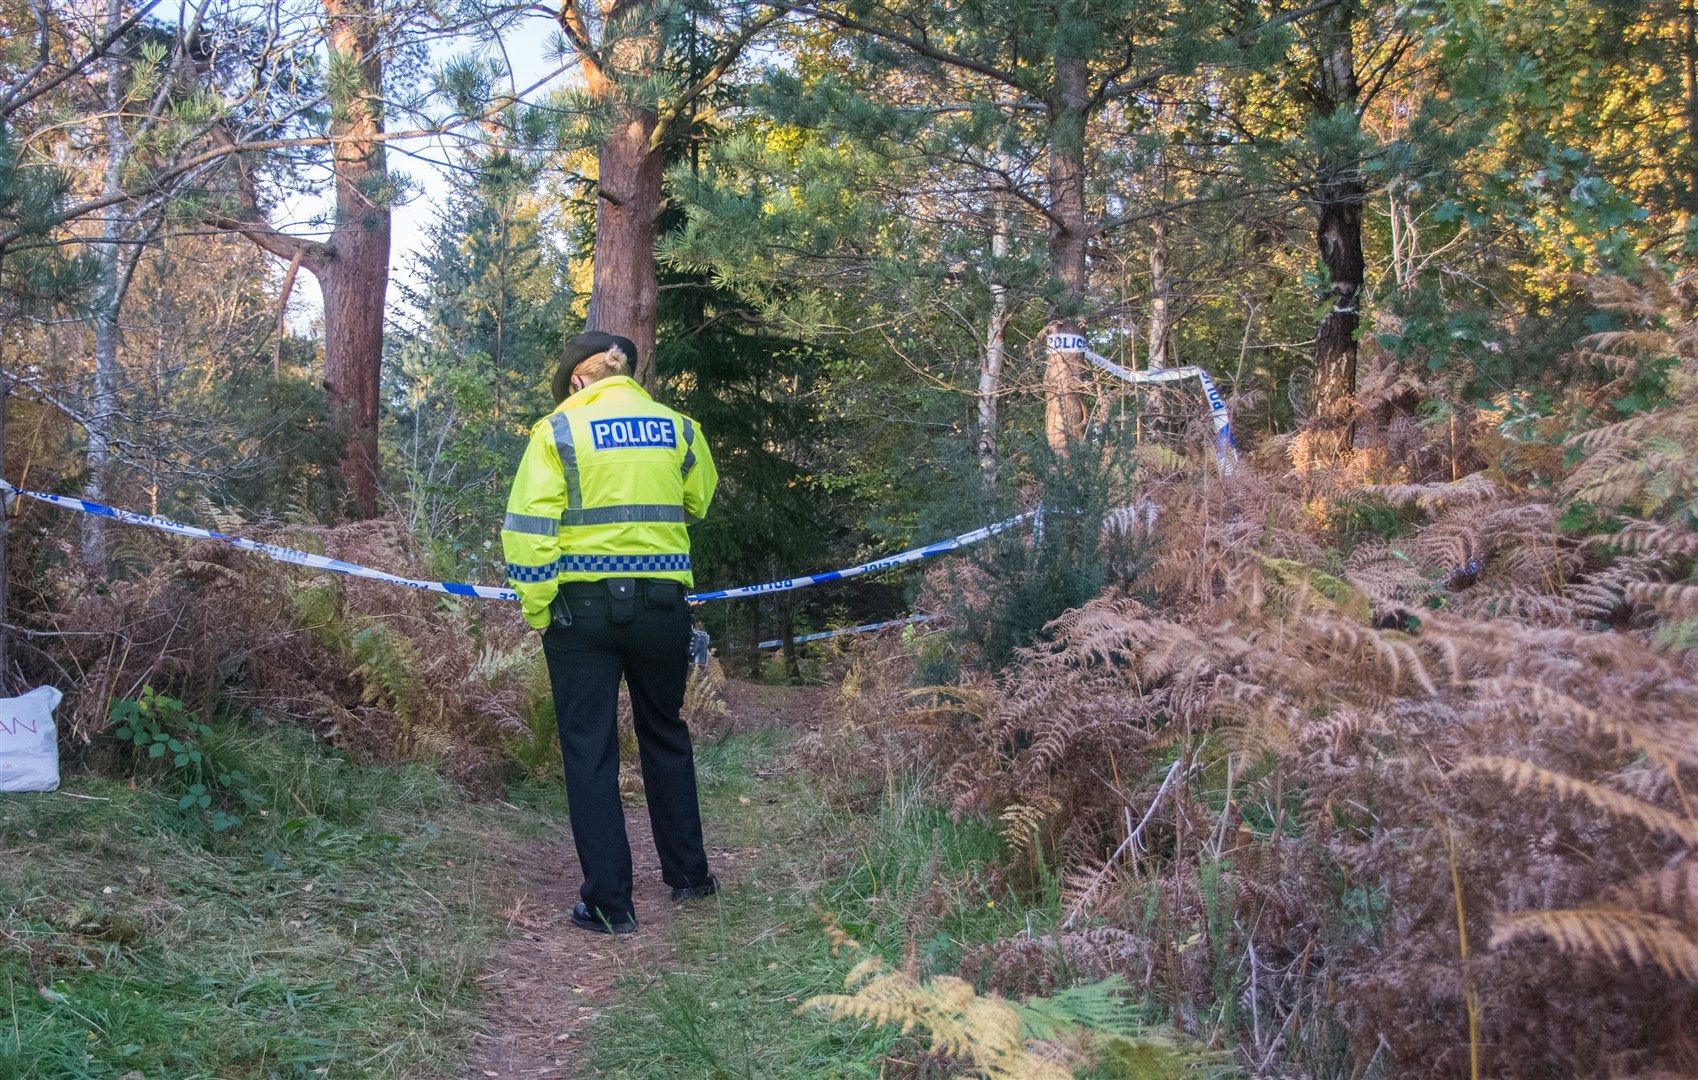 A police officer at the scene after the attacks at Birkenhill Woods, south of Elgin, on October 21 last year.